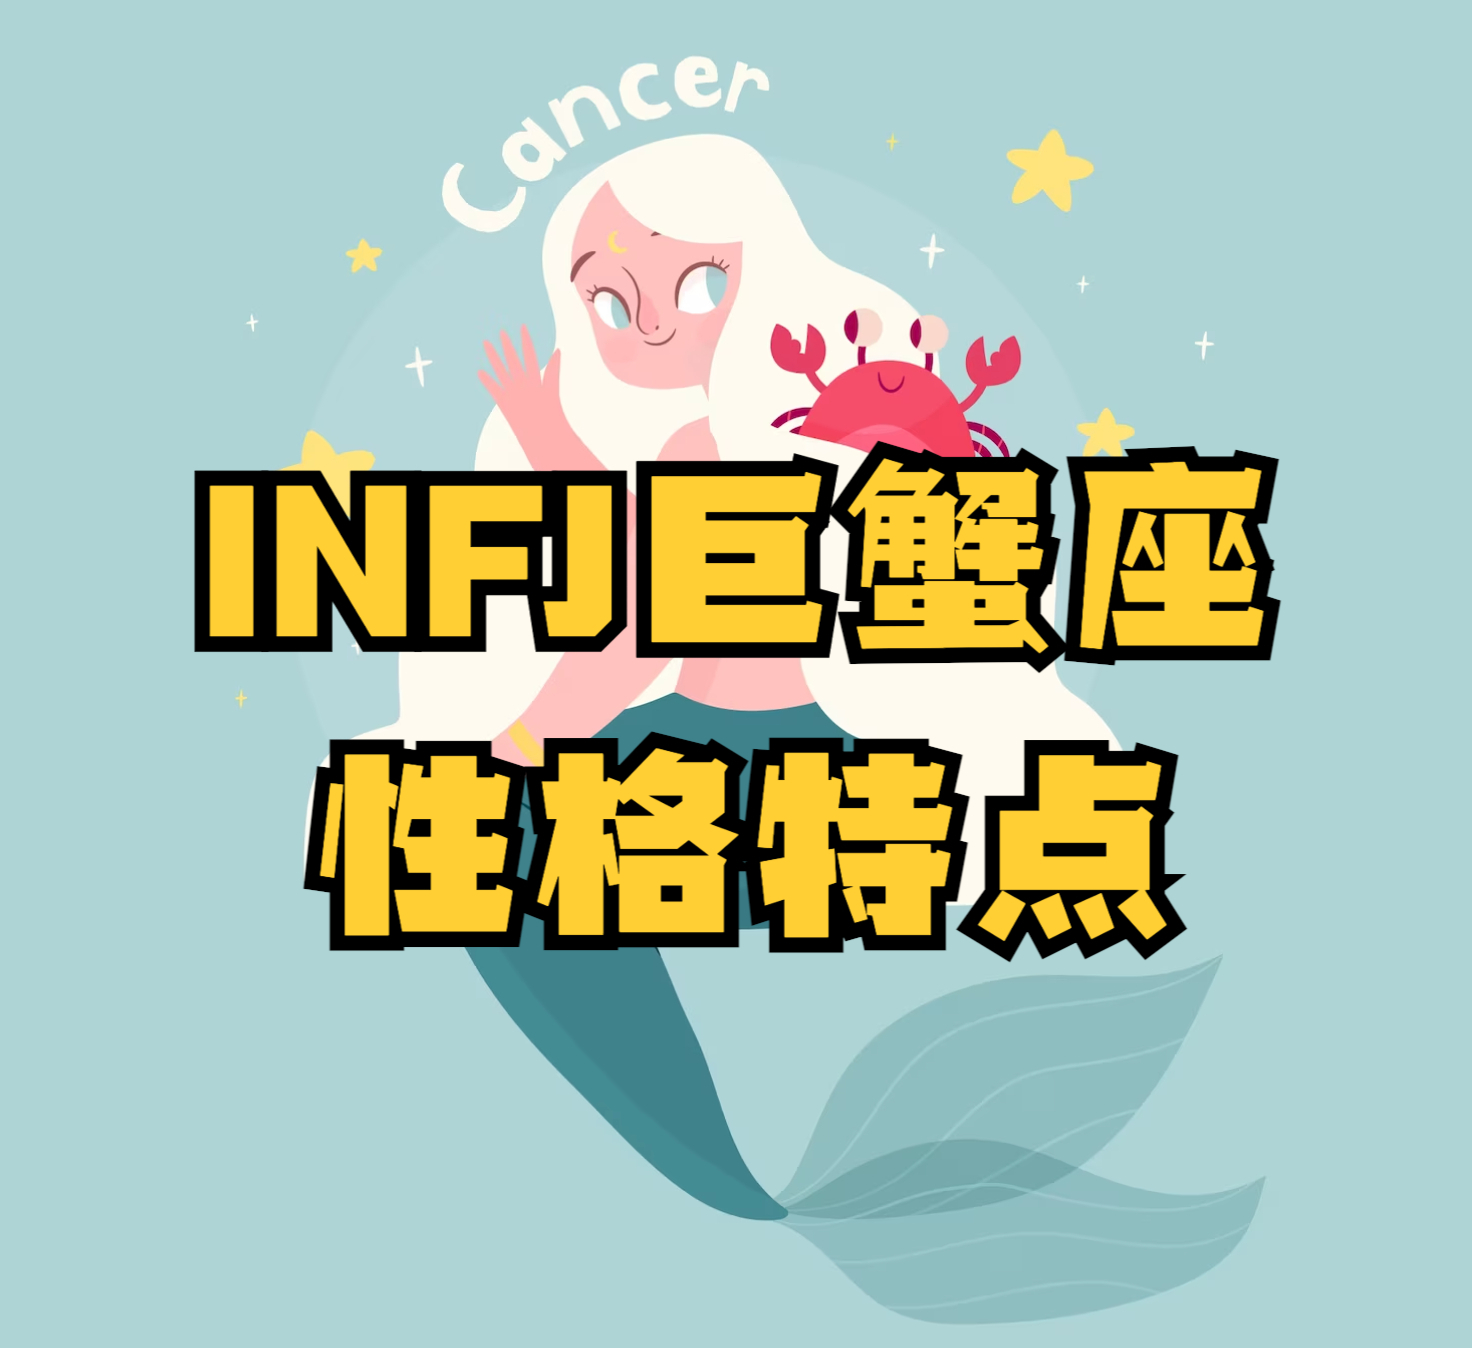 MBTI and zodiac signs: Analysis of INFJ Cancer personality traits